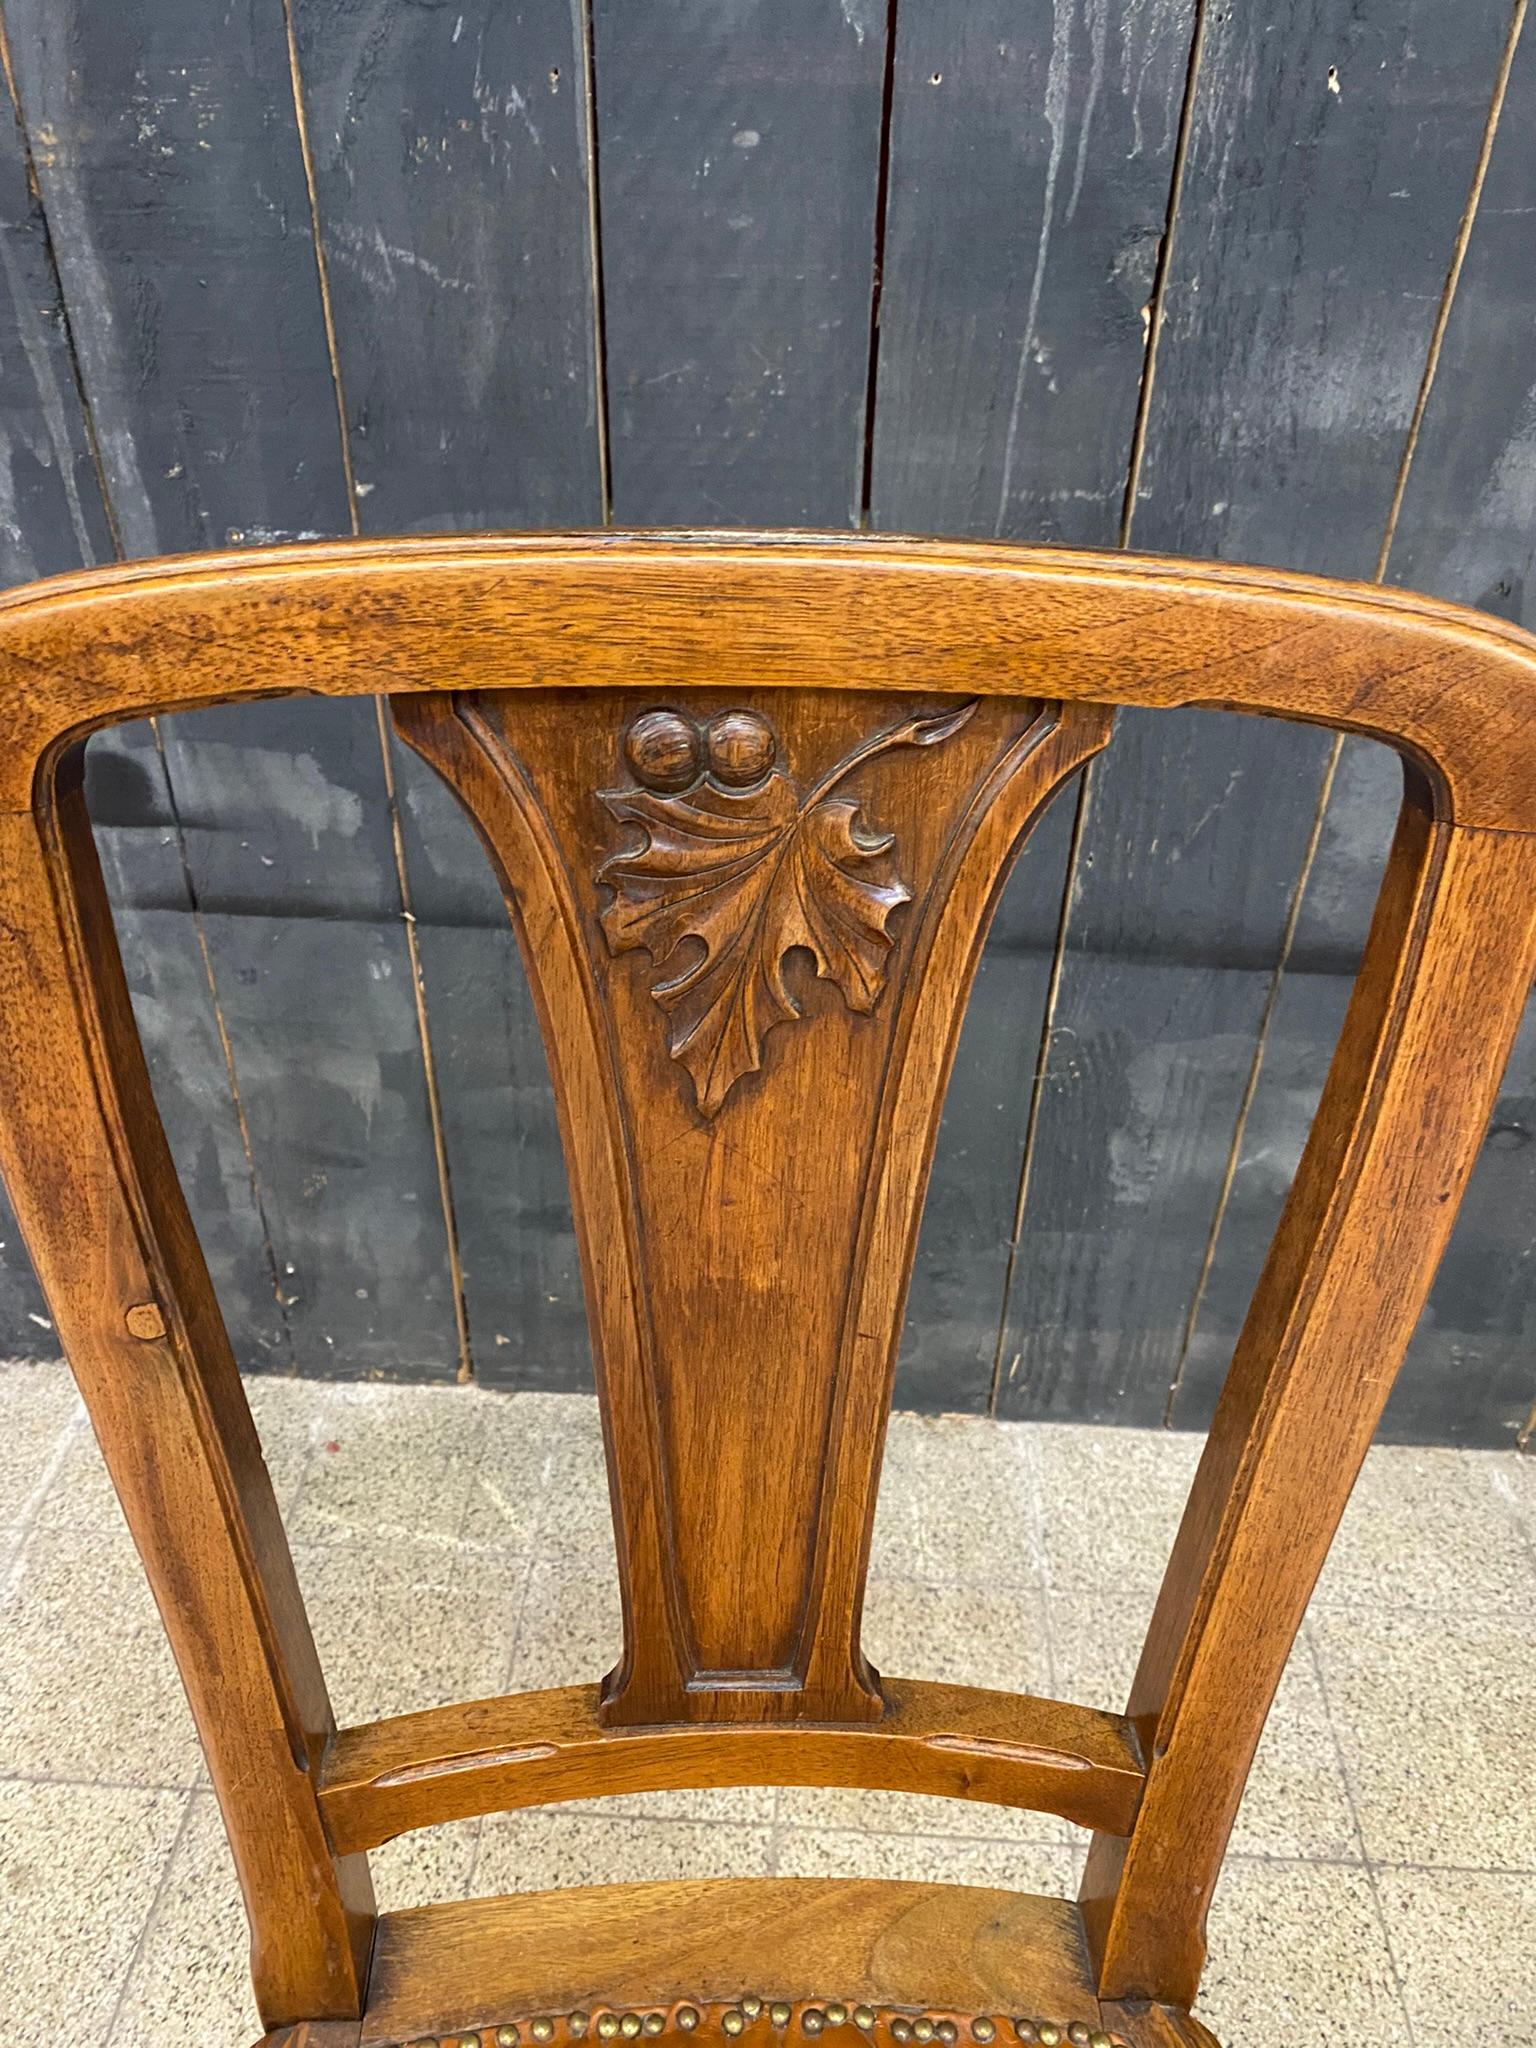 Attributed to Gauthier-Poinsignon & Cie, 6 Art Nouveau Chairs Leather Seats For Sale 1